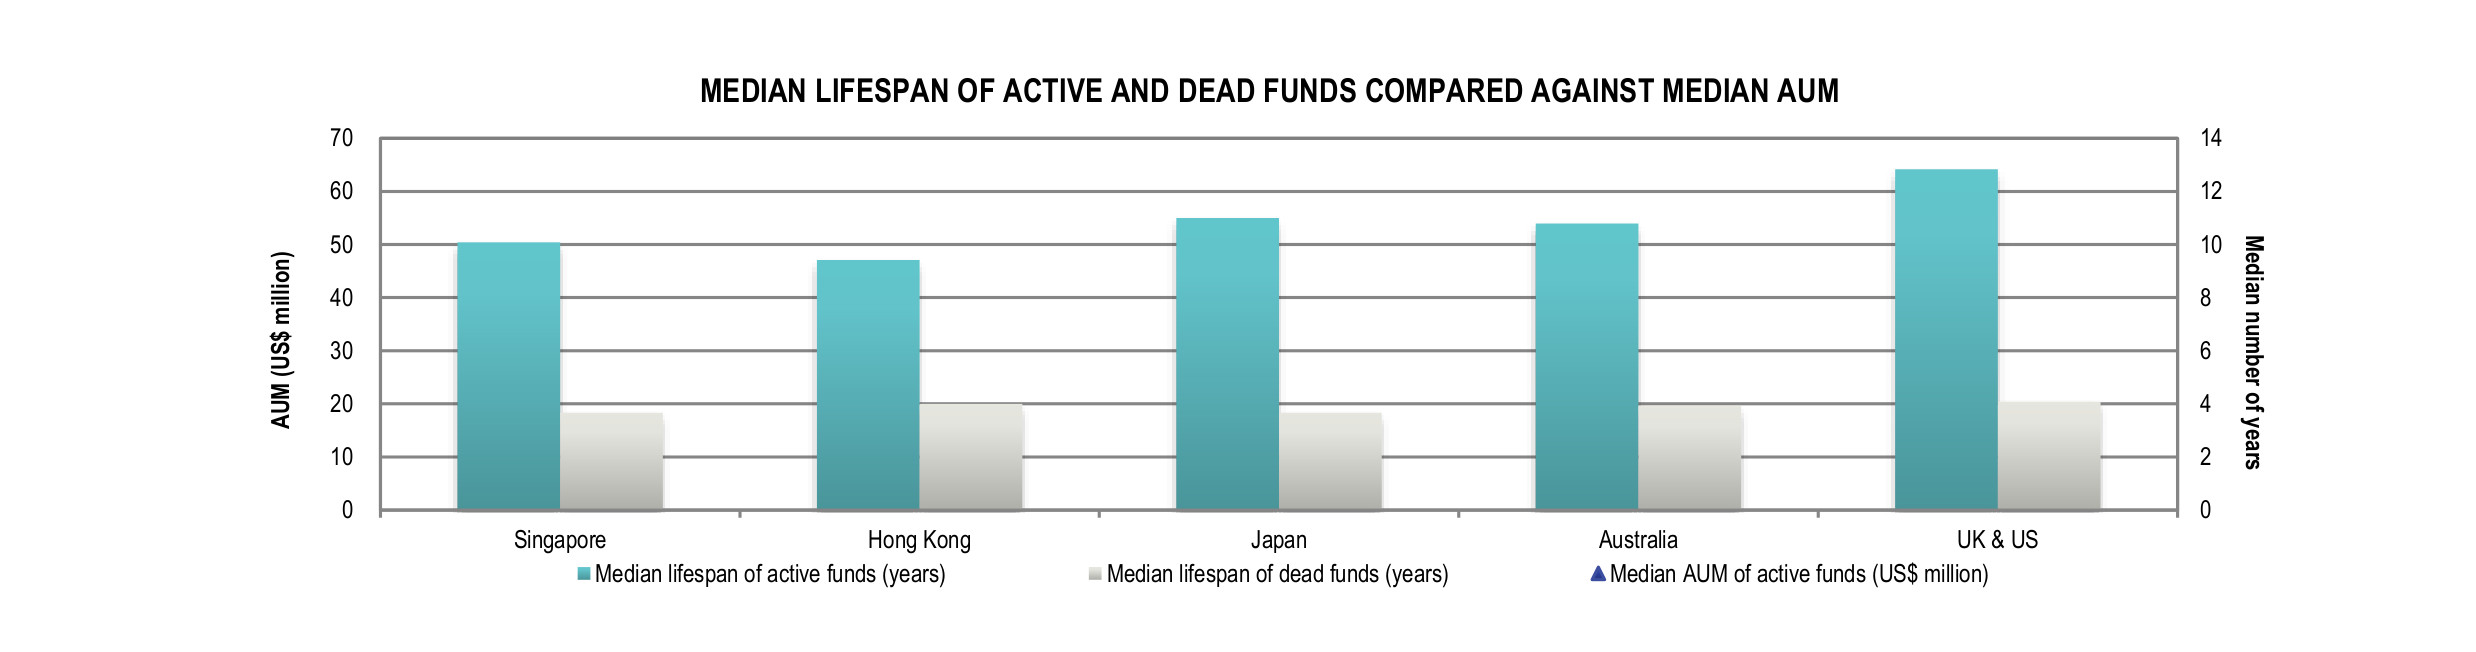 Asian Hedge Funds Infographic July 2021 - Median Lifespans of Active and Dead Funds